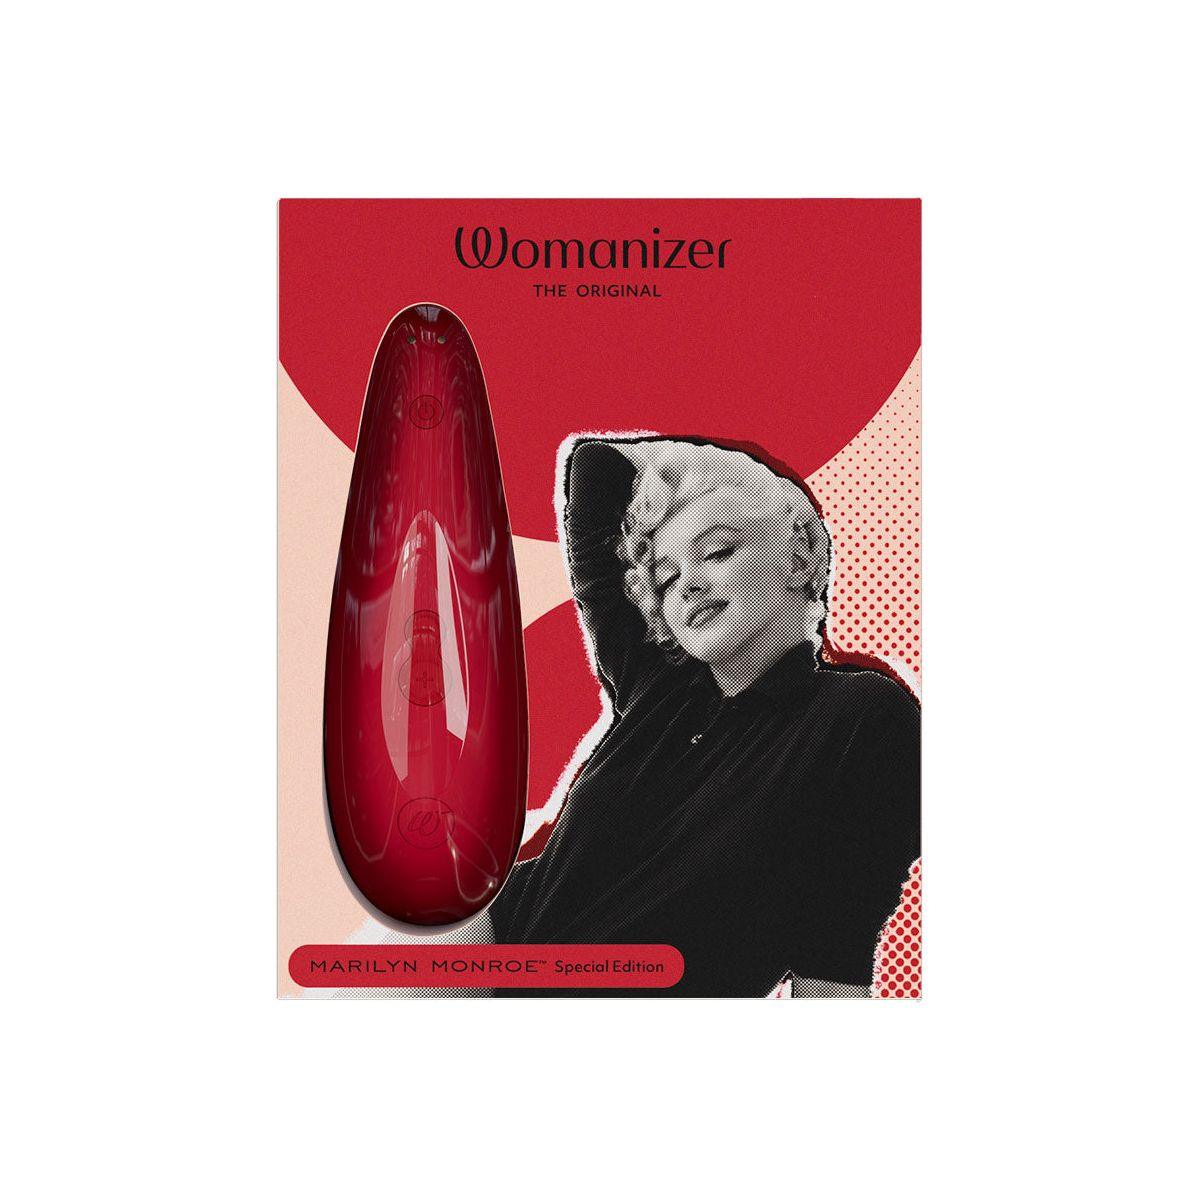 W*manizer Classic 2 Marilyn Monroe Special Edition - Vivid Red - shop enby